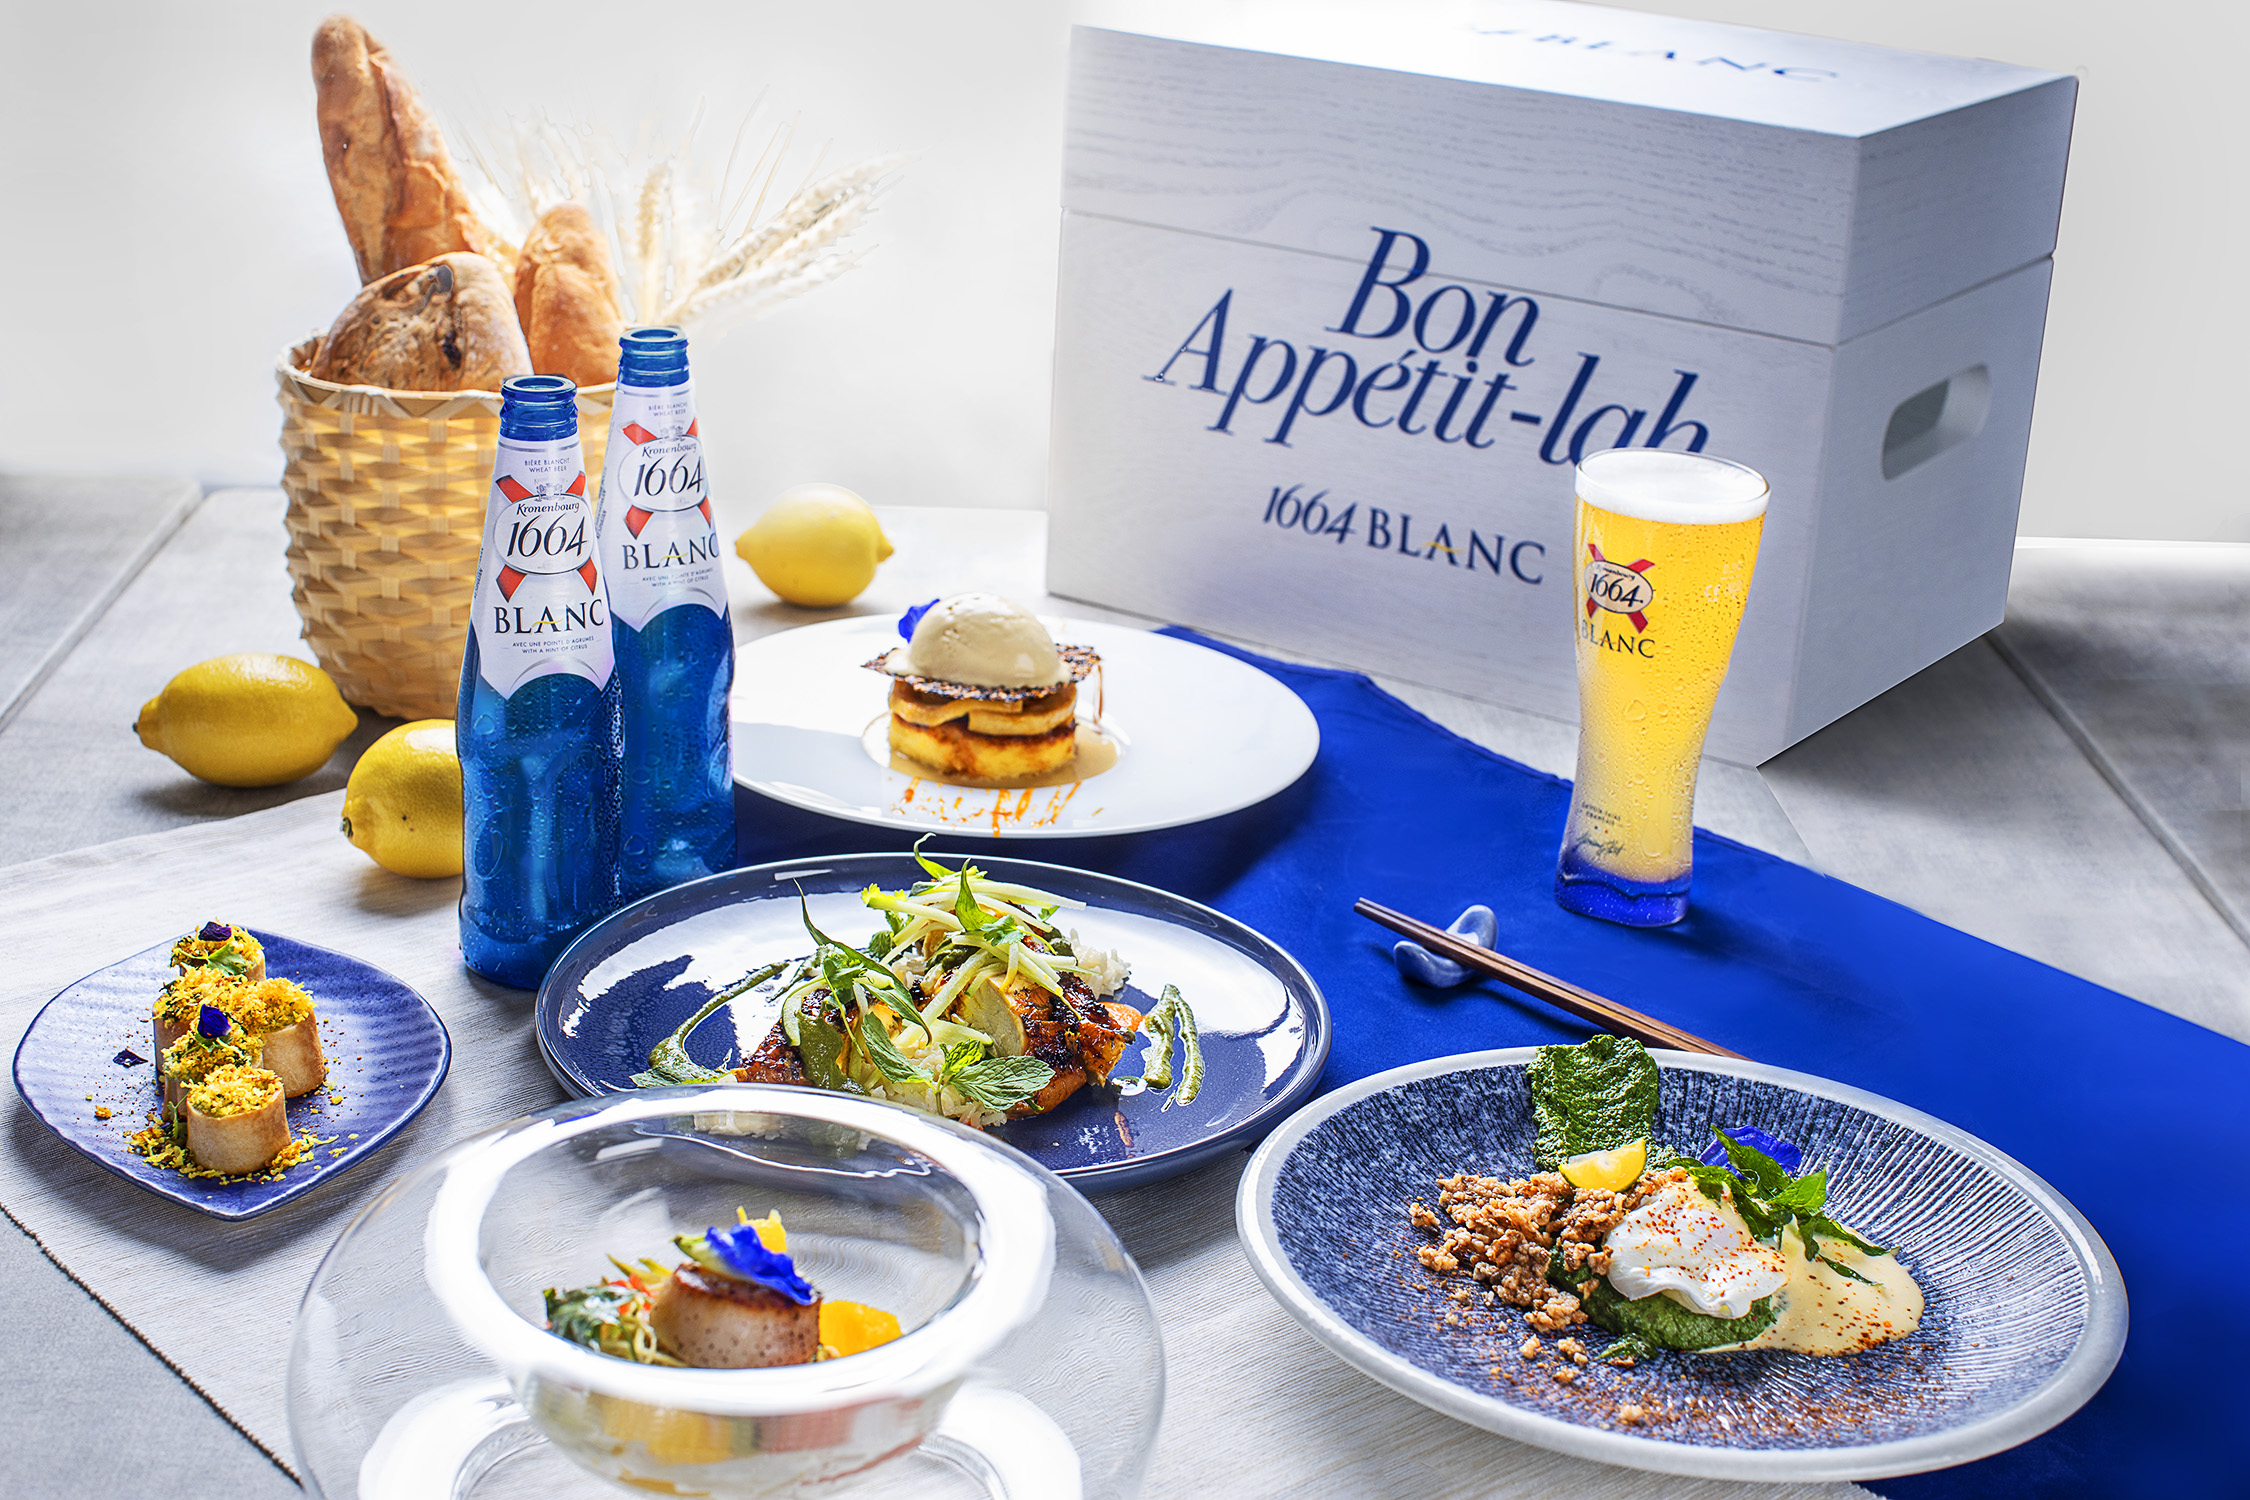 Photo 2 1664 Blanc bridges French and Malaysian cuisine in Bon Appetit lah campaign 1